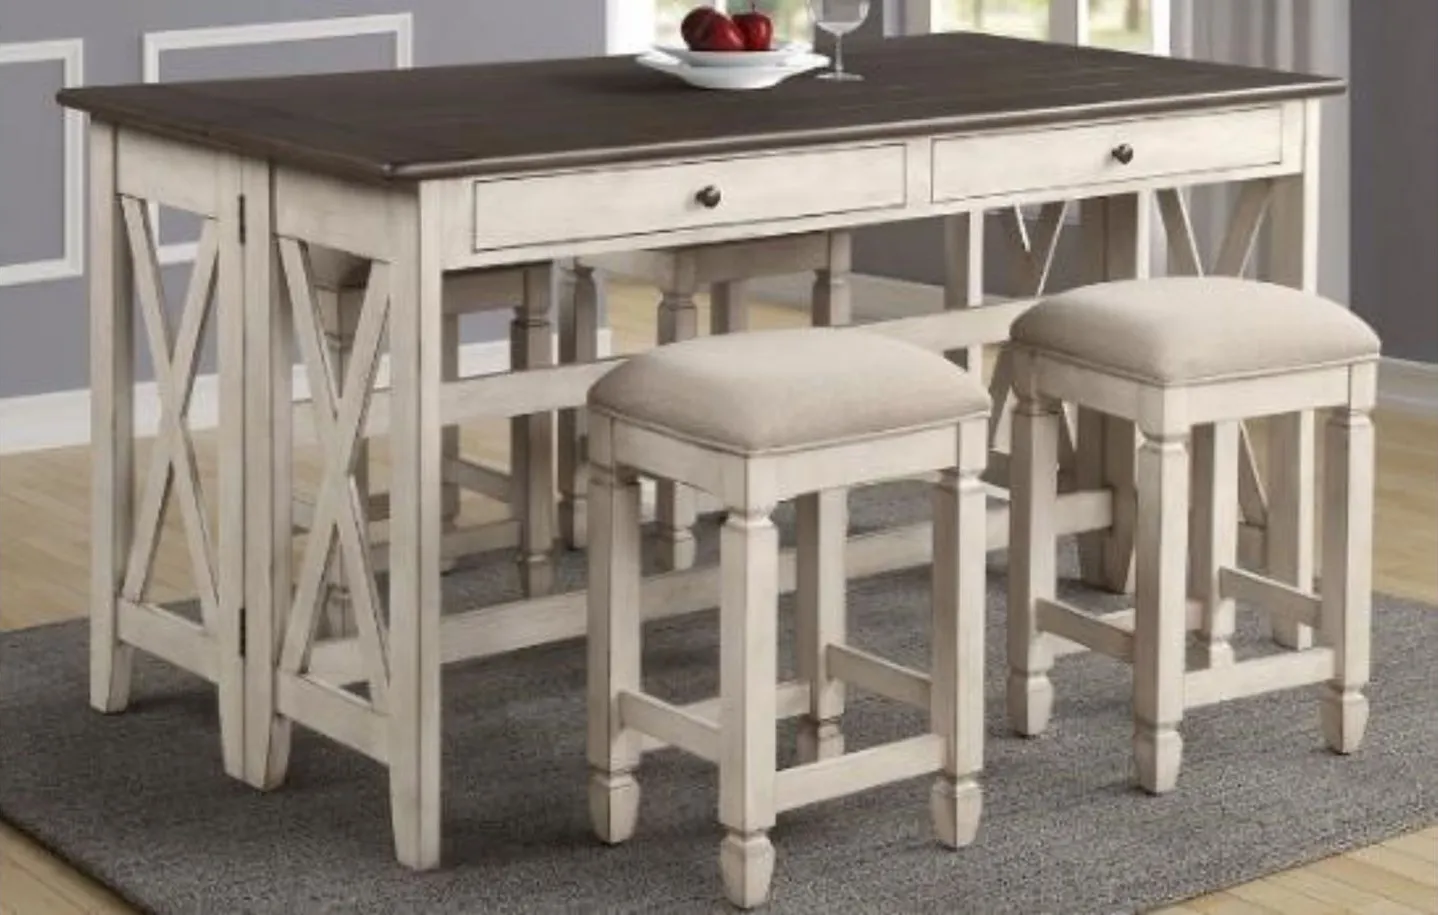 Waverly Counter Height Drop Leaf Table with 4 stools in White by Bernards Furniture Group